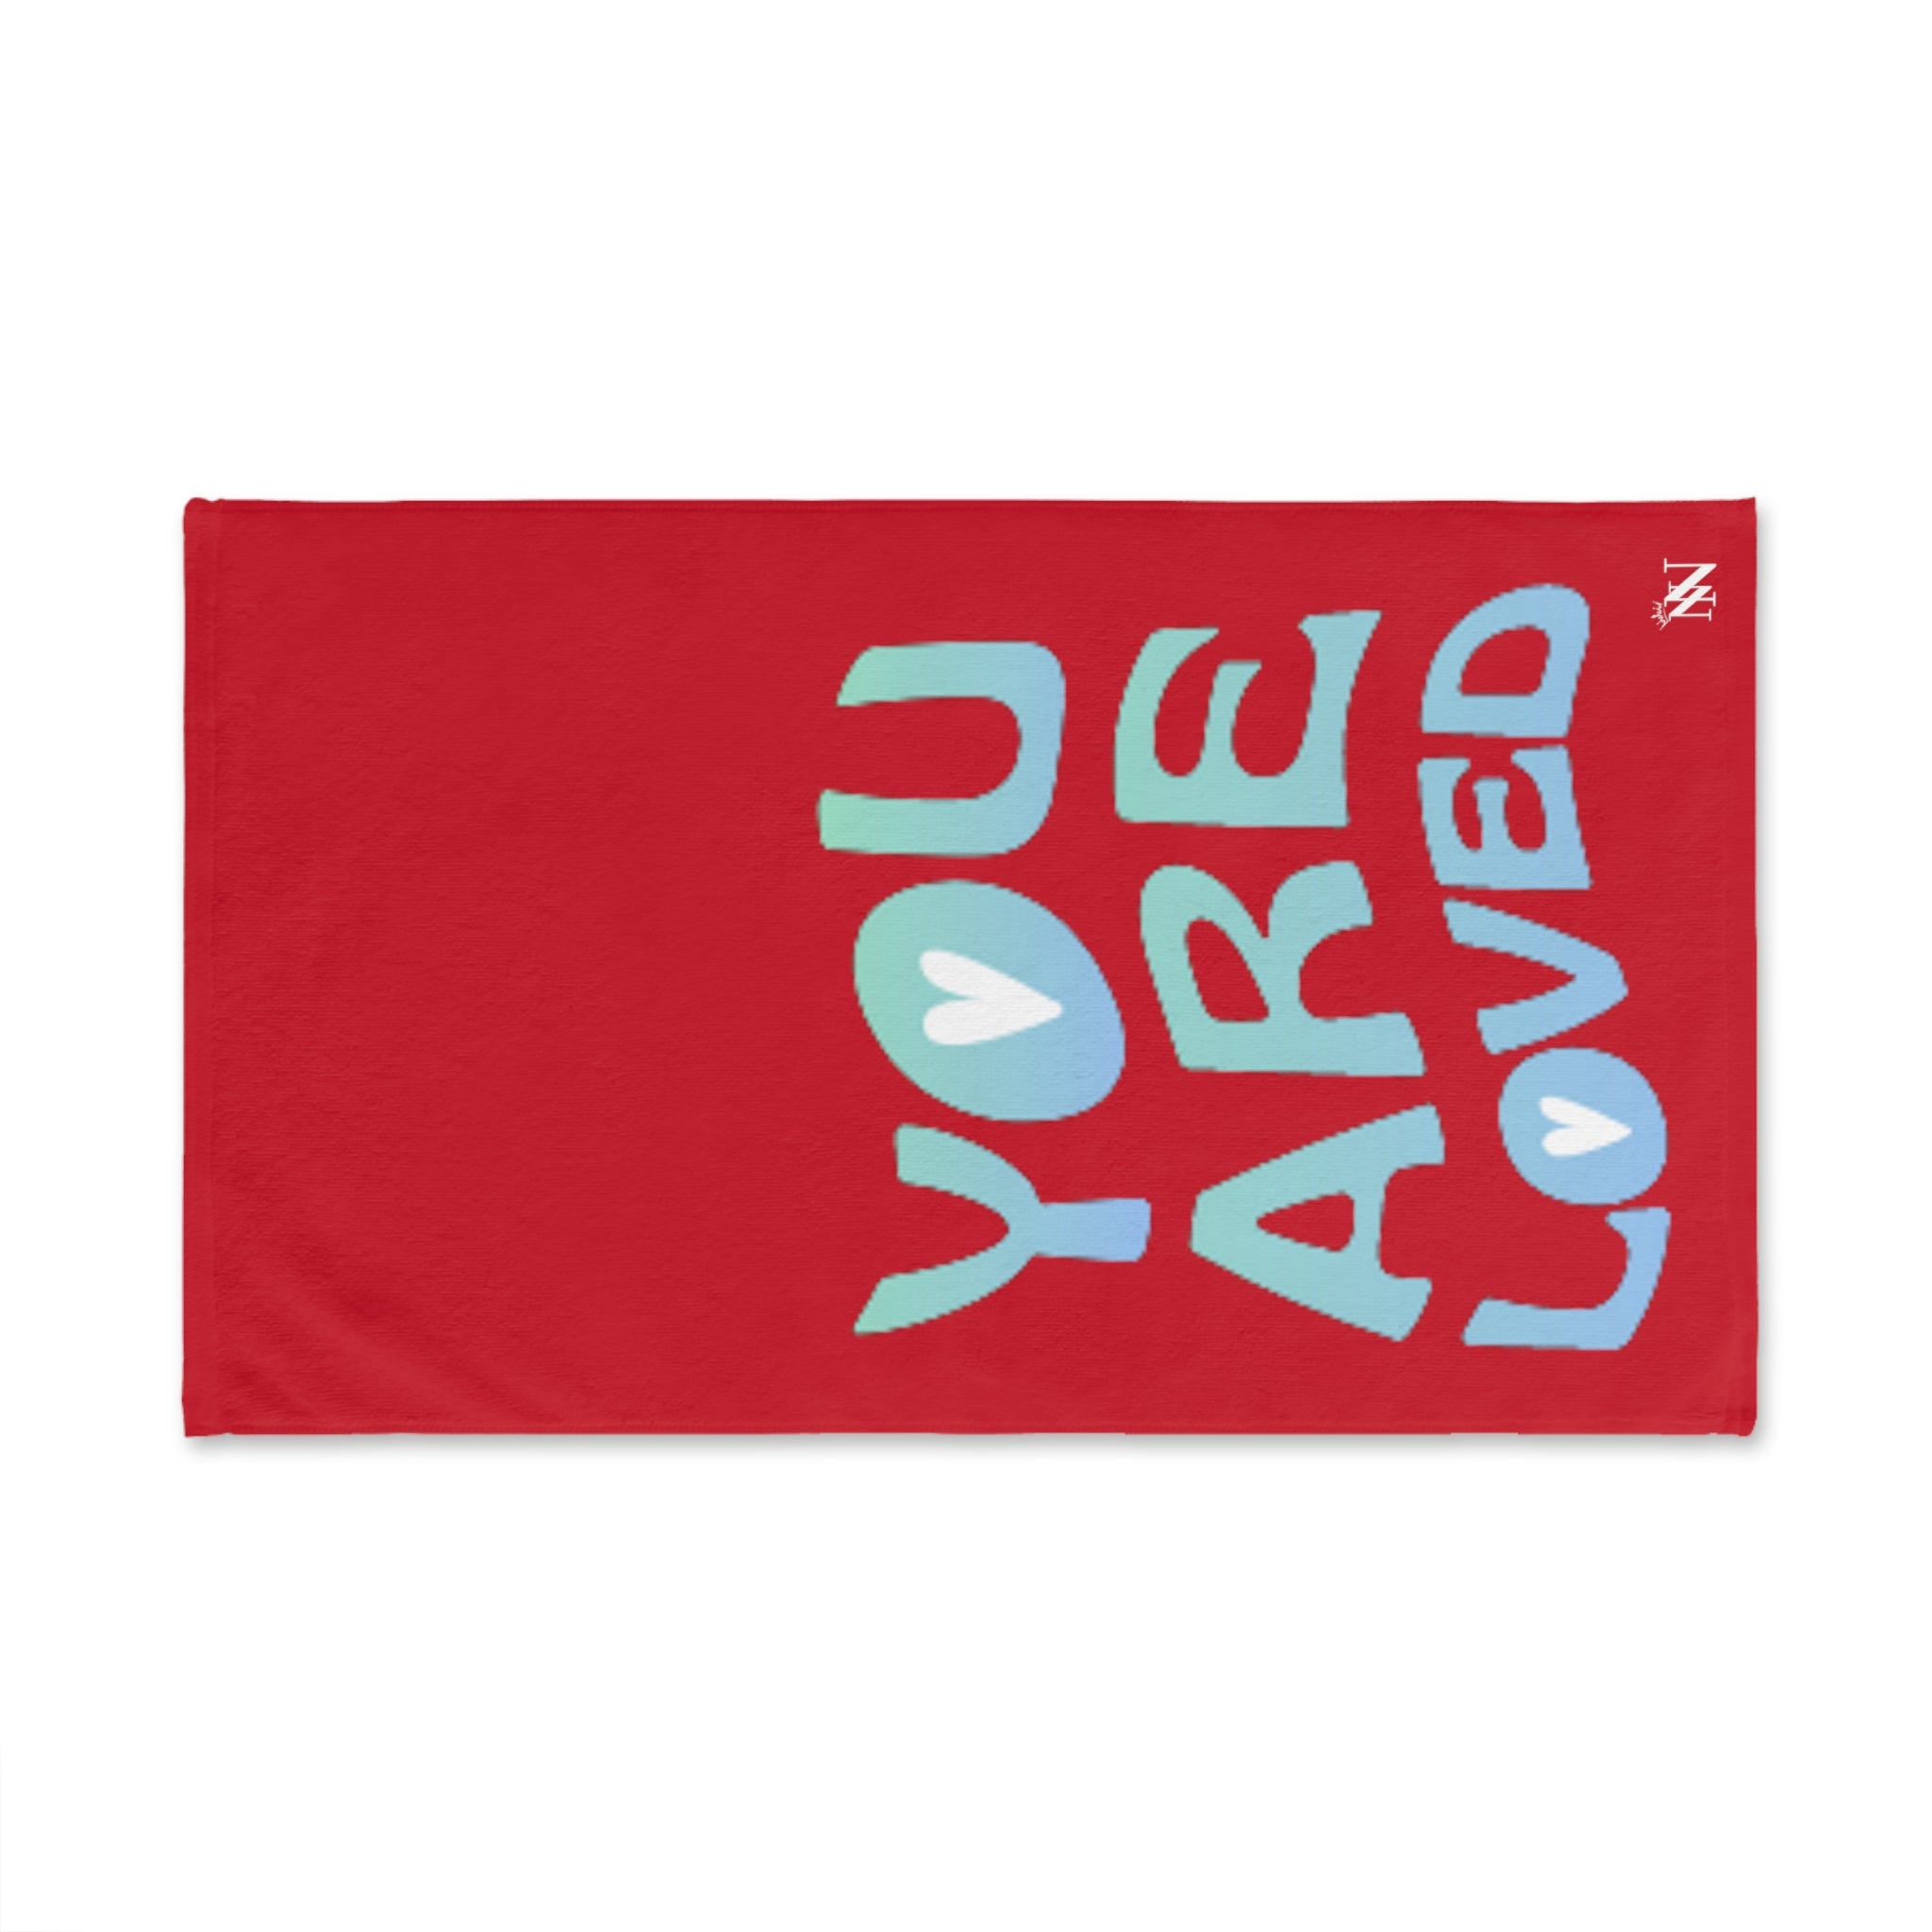 Loved You Are Red | Sexy Gifts for Boyfriend, Funny Towel Romantic Gift for Wedding Couple Fiance First Year 2nd Anniversary Valentines, Party Gag Gifts, Joke Humor Cloth for Husband Men BF NECTAR NAPKINS